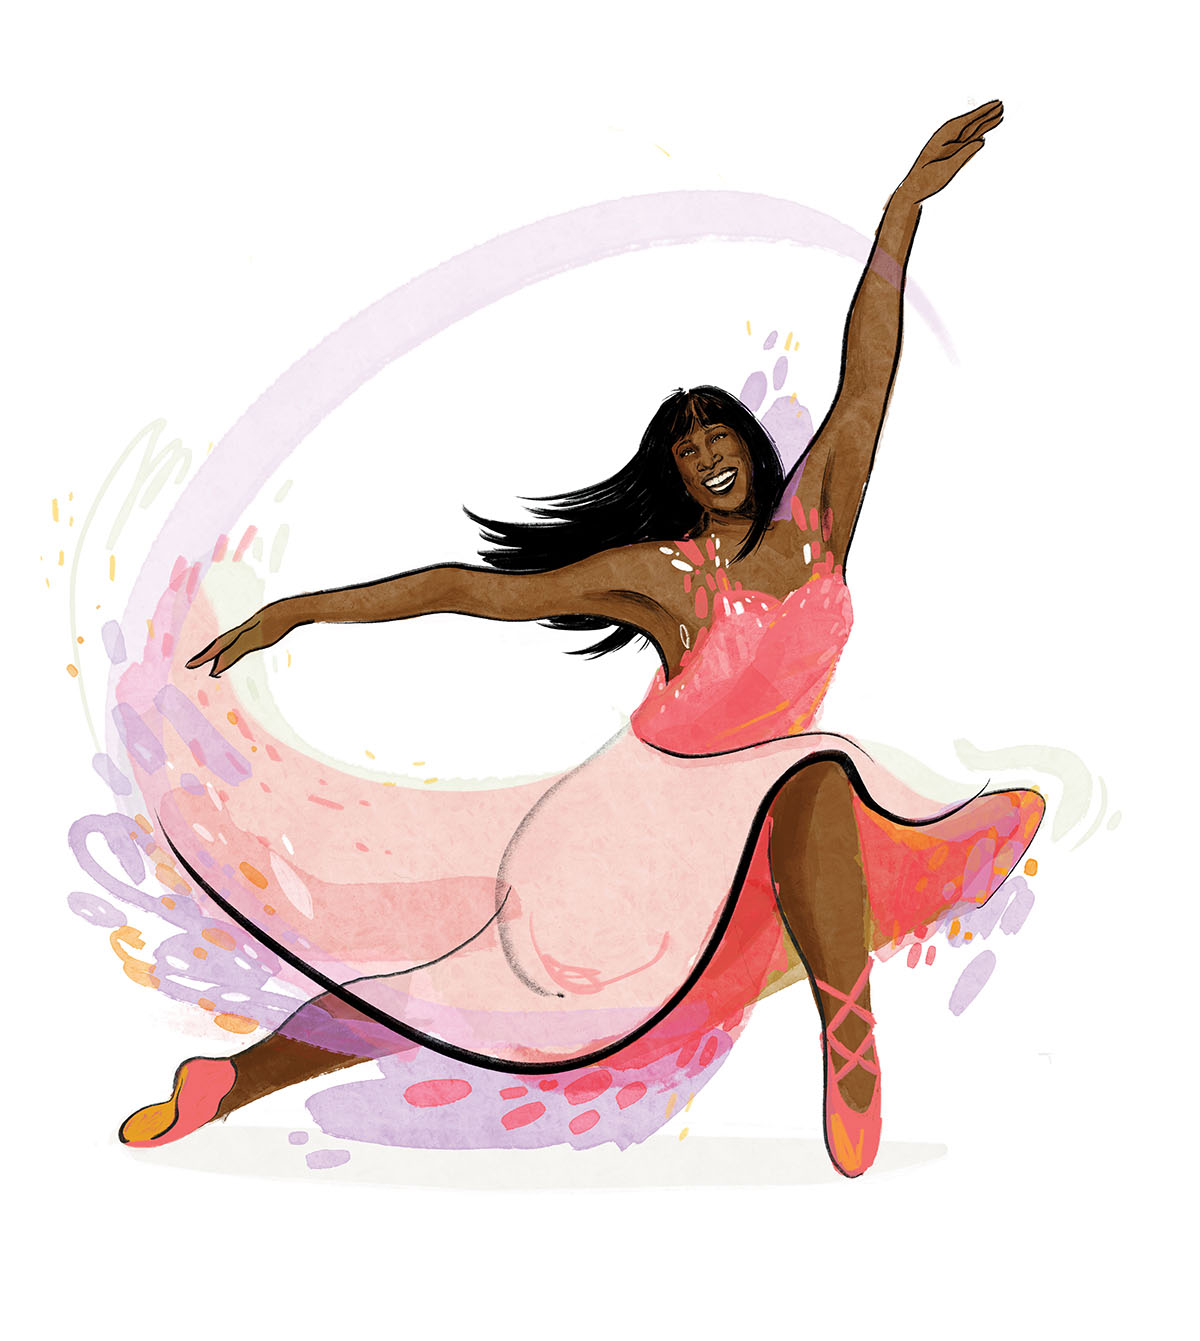 An illustration of dancer Lauren Anderson in a pink dress and ballet shoes